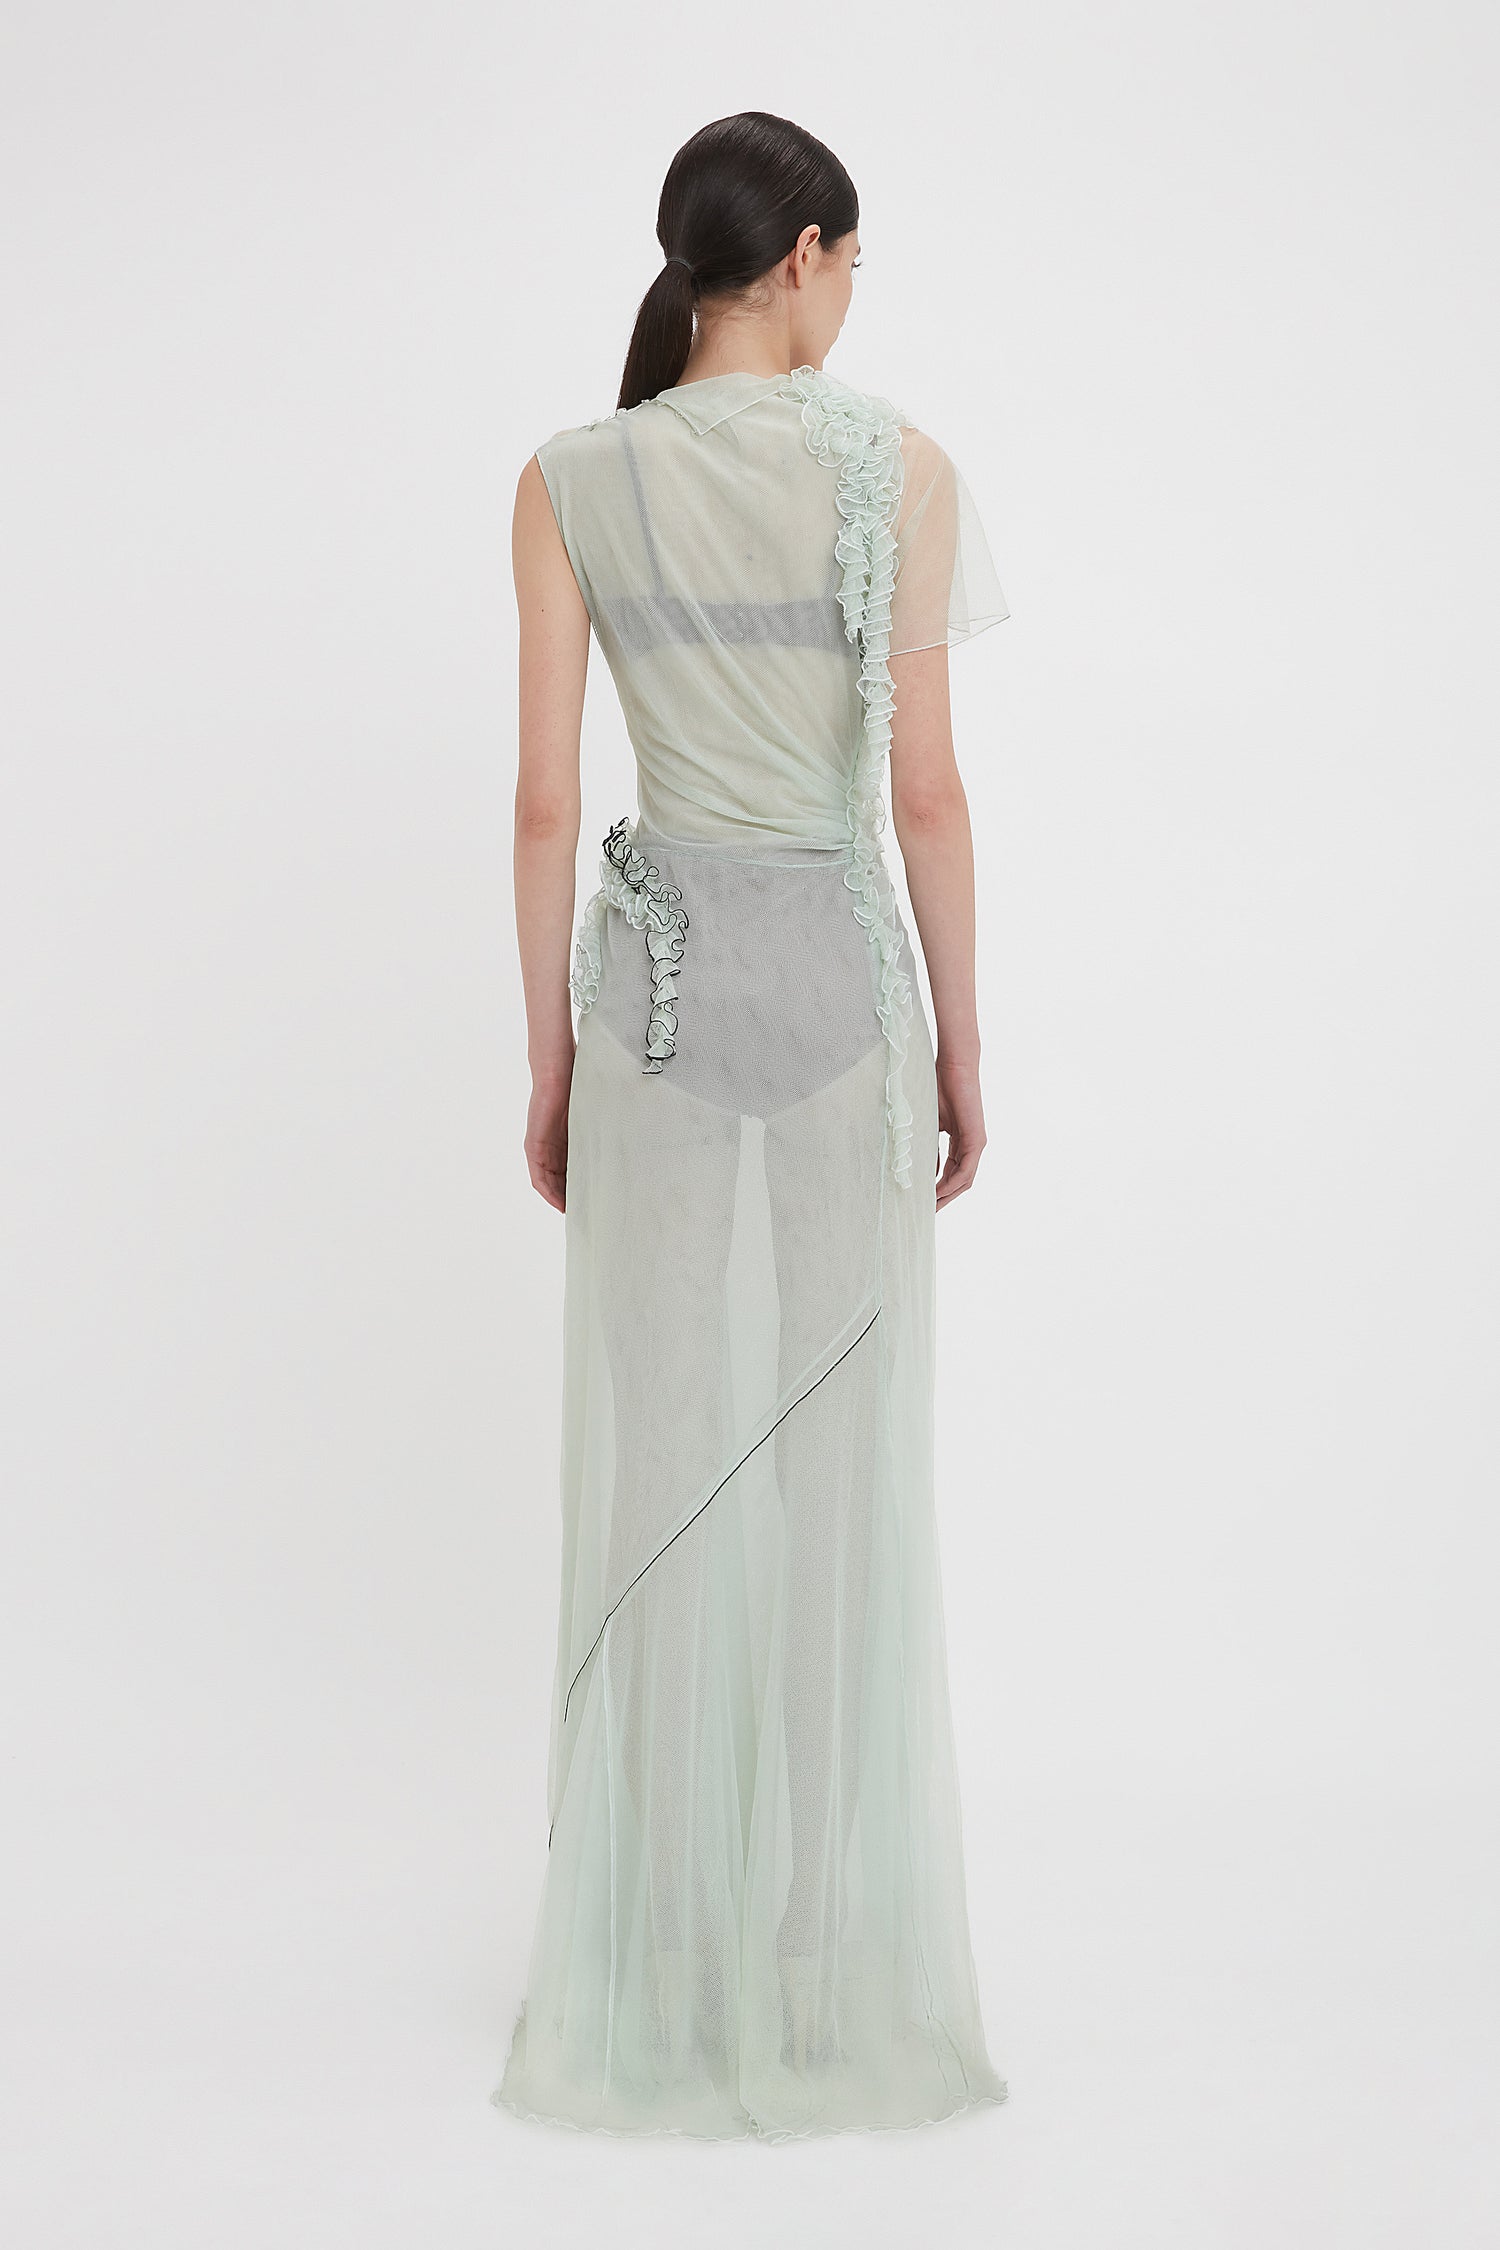 A person with long dark hair stands facing away, wearing a Gathered Tulle Detail Floor-Length Dress In Jade by Victoria Beckham against a plain white background. Discover more enchanting styles at VictoriaBeckham.com.